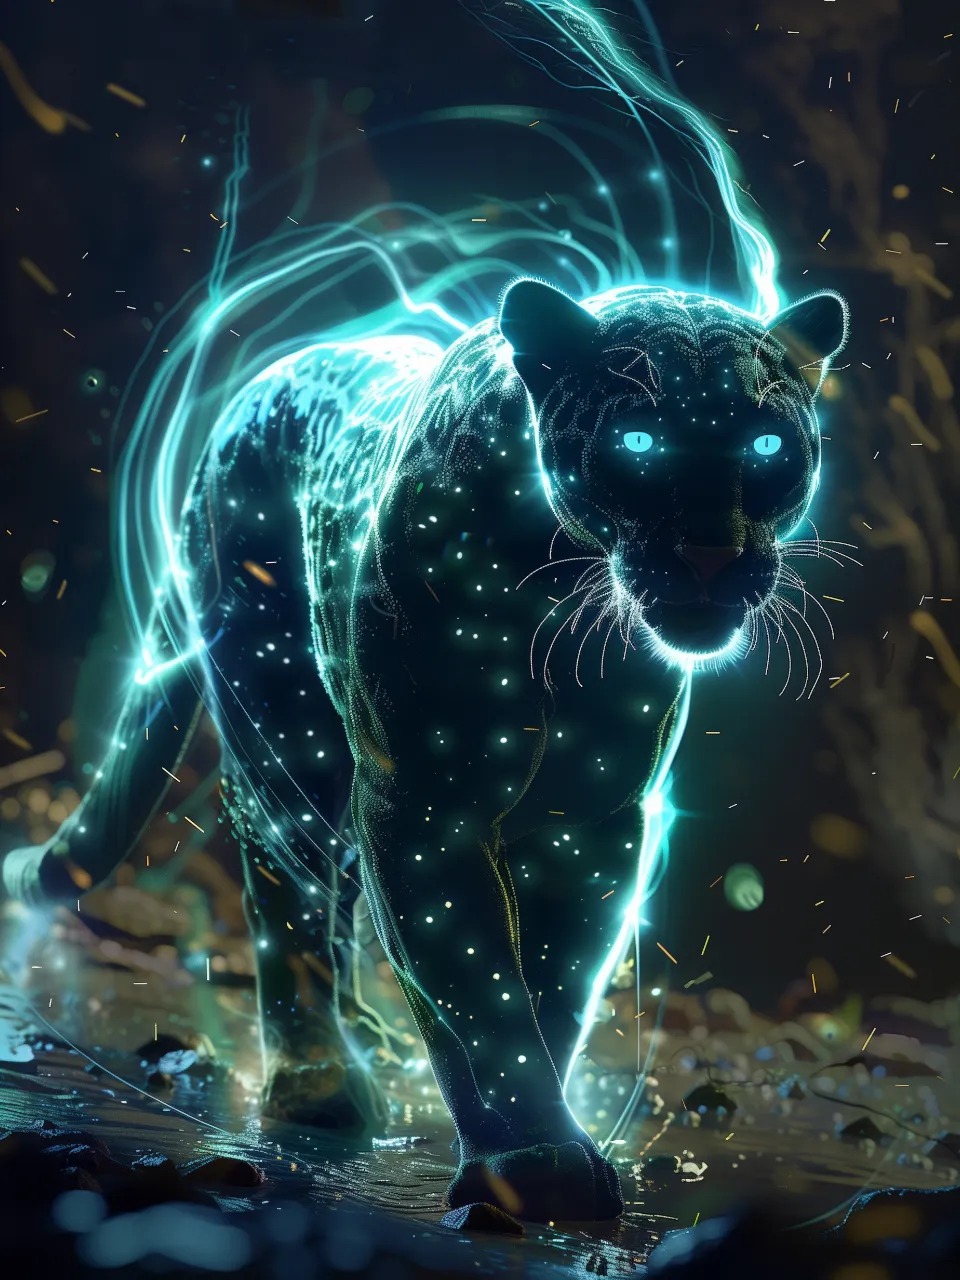 A jaguar composed of electric blue light racing through a gallery